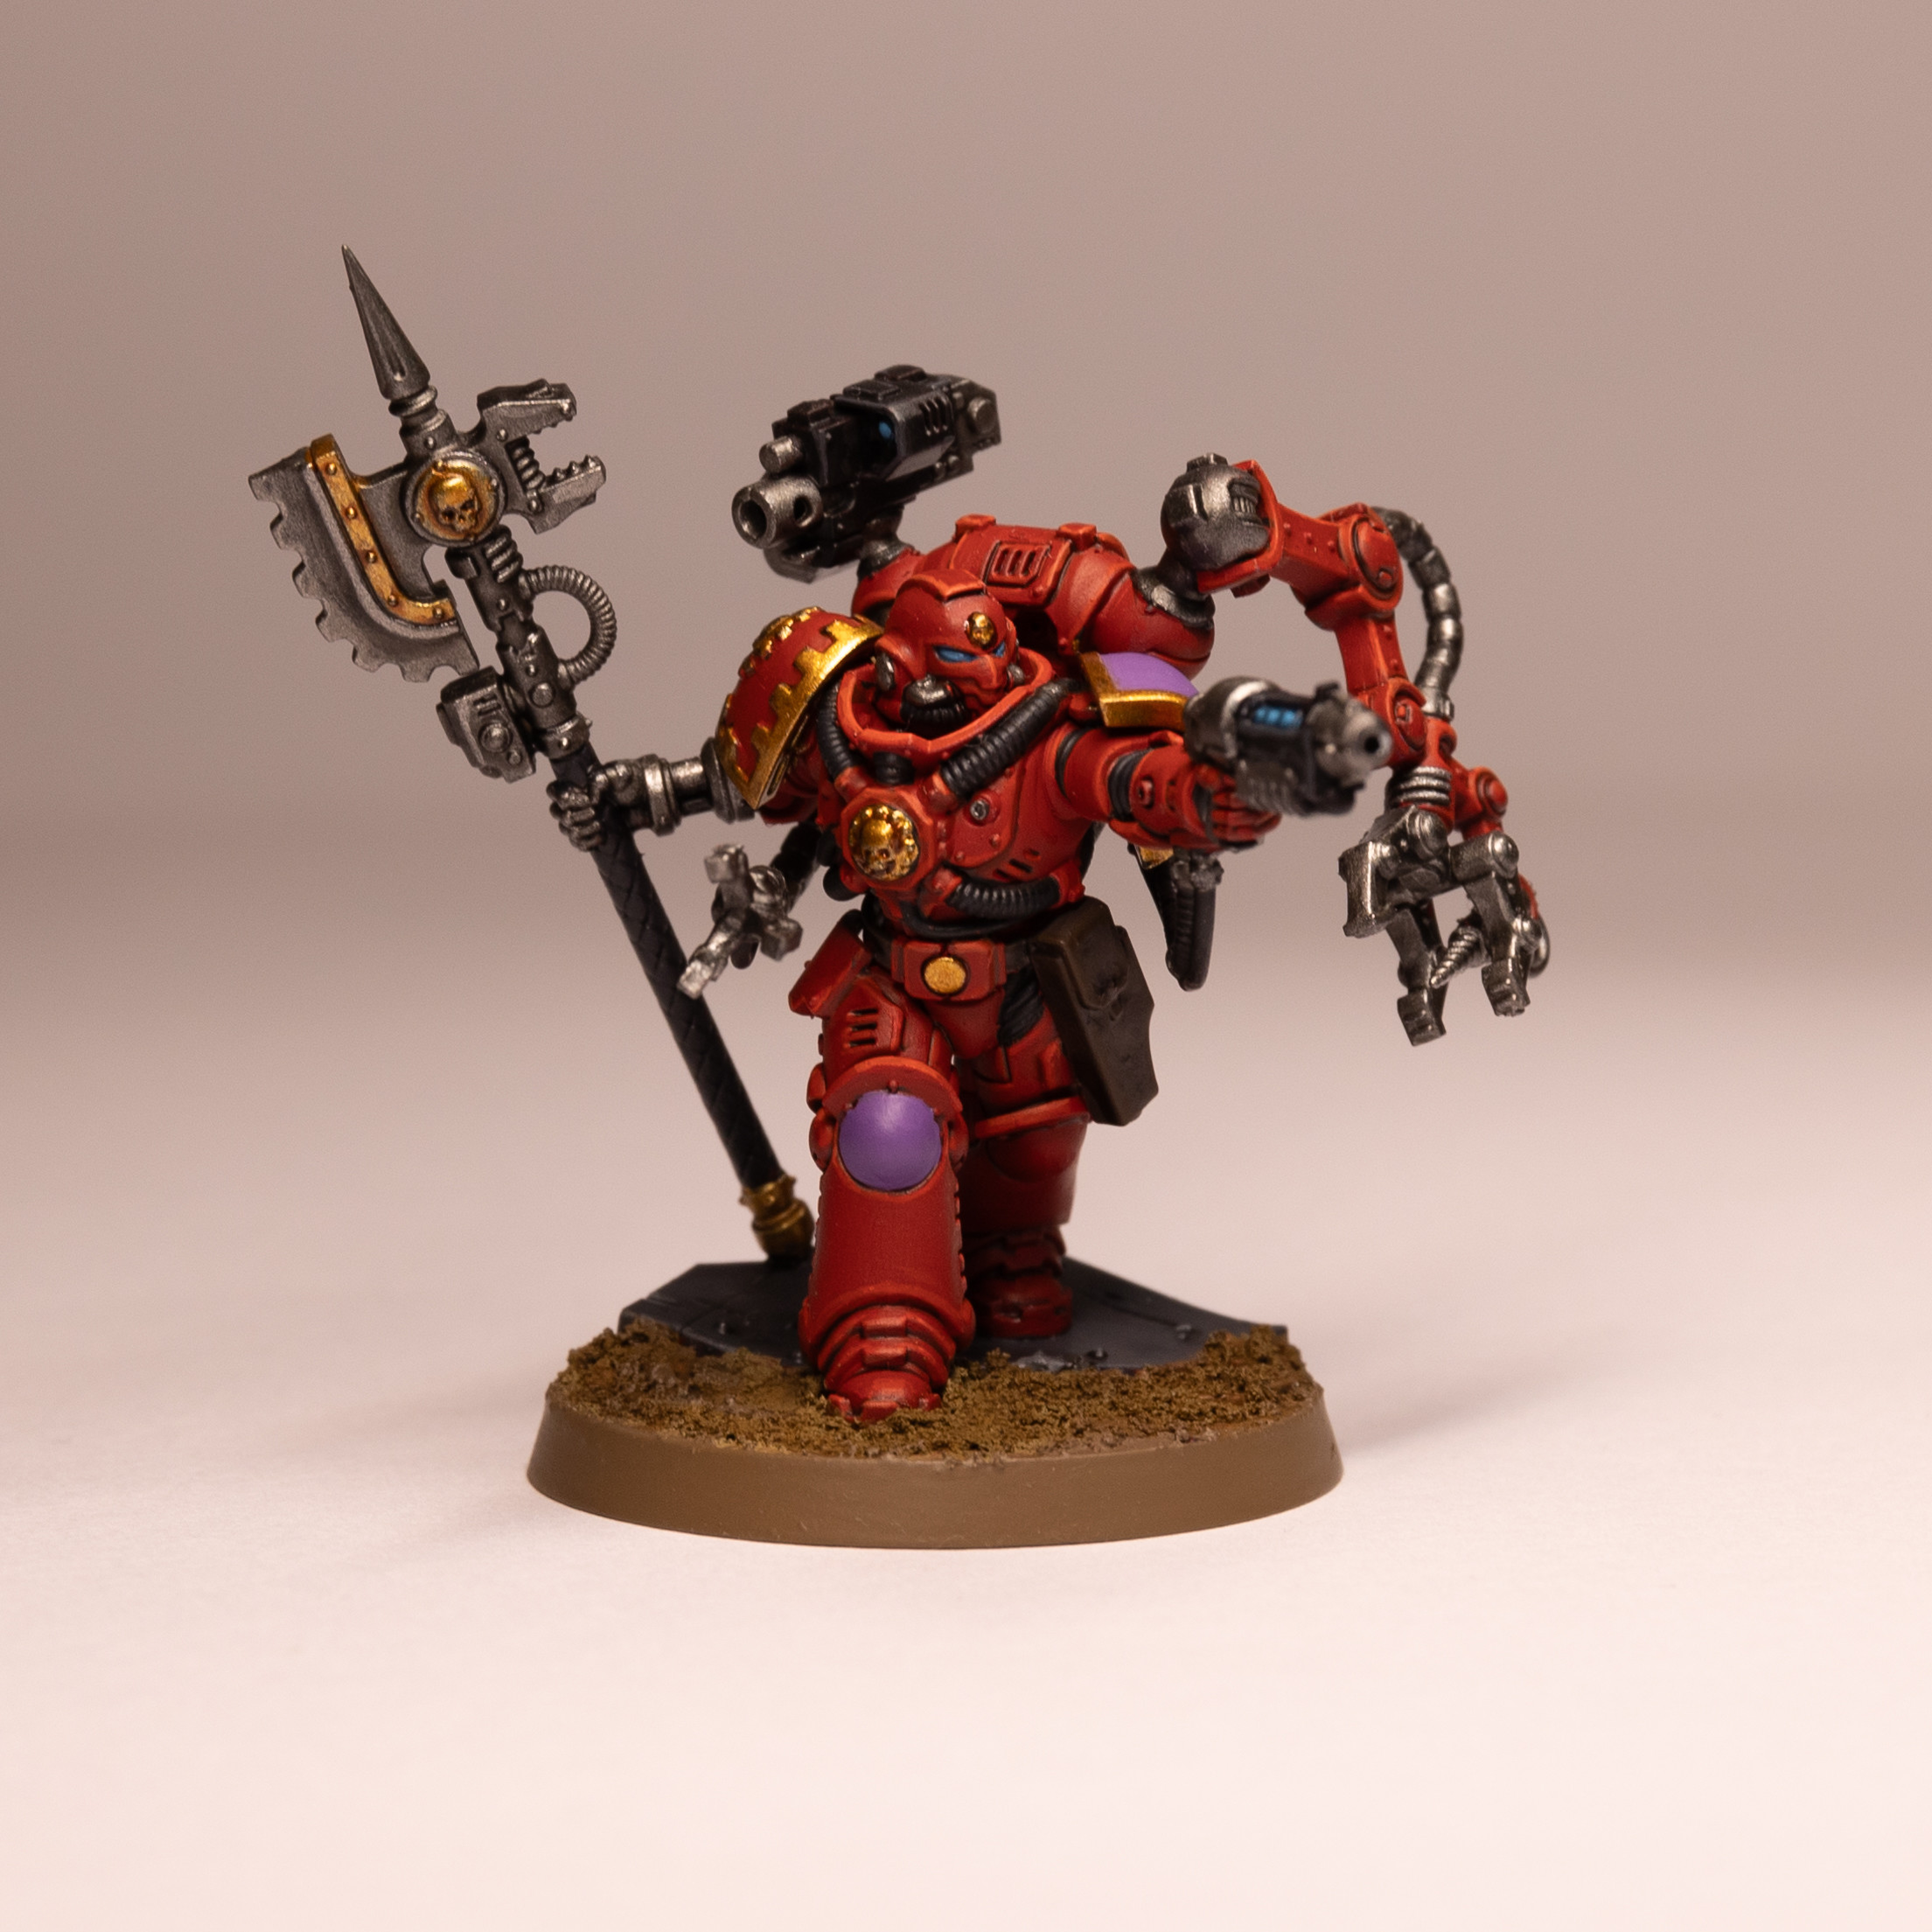 Red Space Marine Techmarine with a purple shoulder and knee pad, stood on a sandy coloured base. The Techmarine has a robotic right hand holding an elaborate axe, above their right shoulder is a backpack mounted gun. In their left hand they’re holding a gun with a glowing blue barrel and on the left side of their backpack is a robotic arm with a claw and drill at the end. The Techmarine is looking to the right of the image looking down the gun sights.